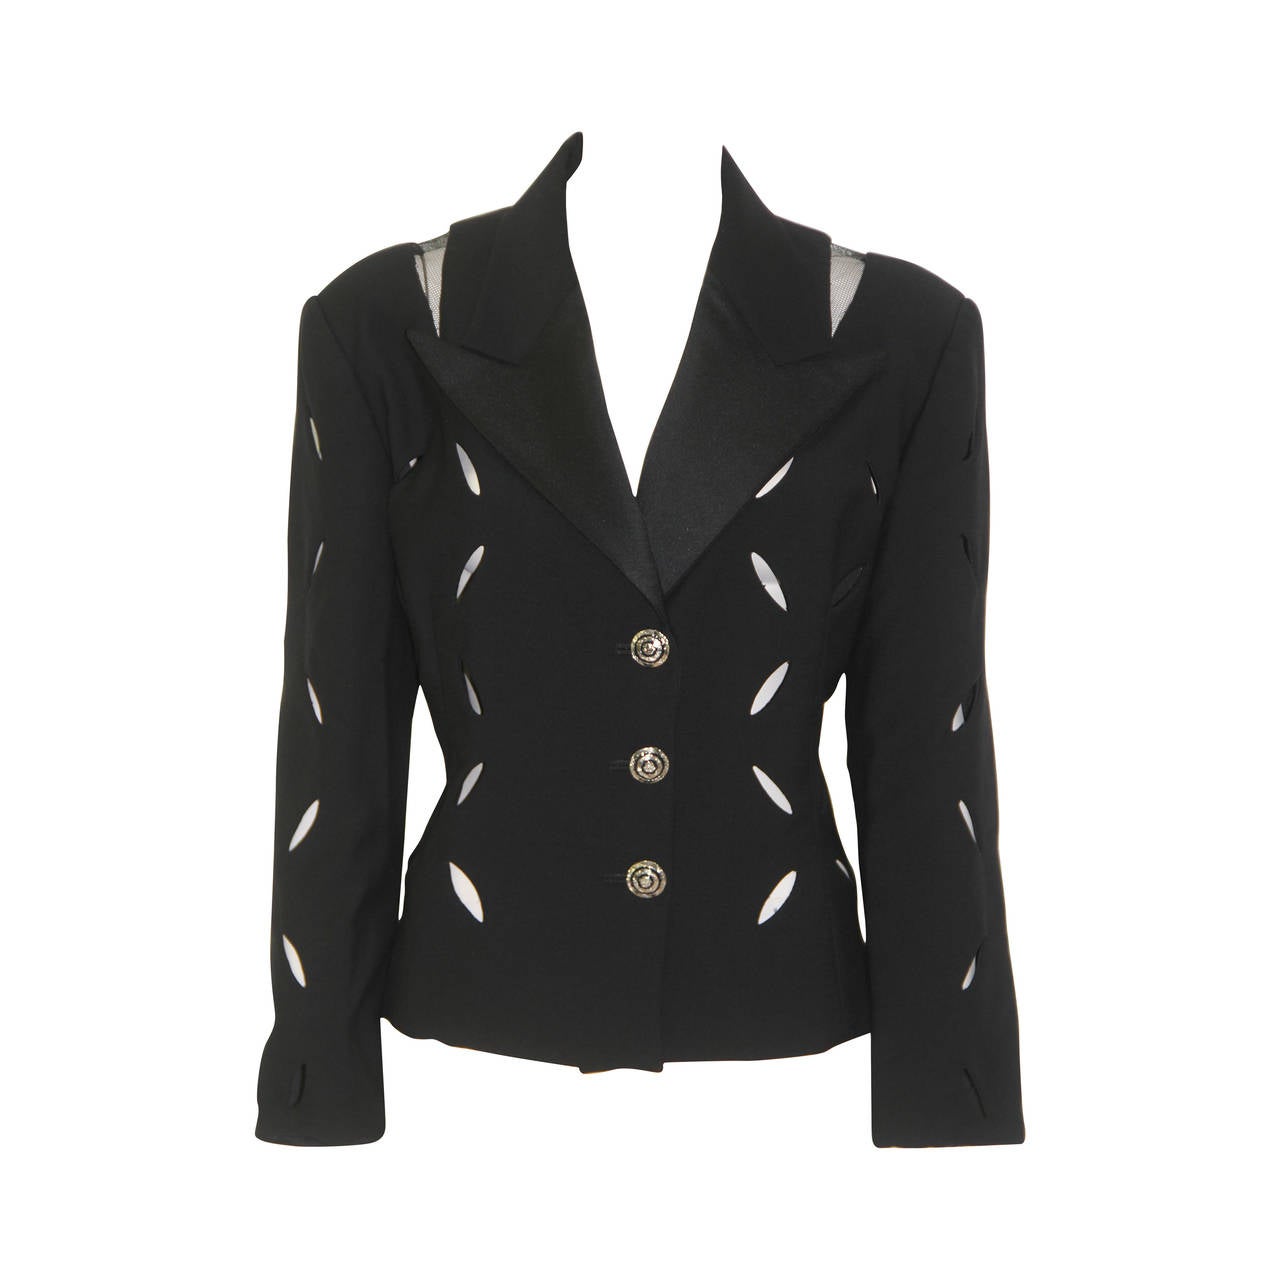 Gianni Versace Punk Cut-Out Tuxedo Evening Jacket Spring 1994 For Sale